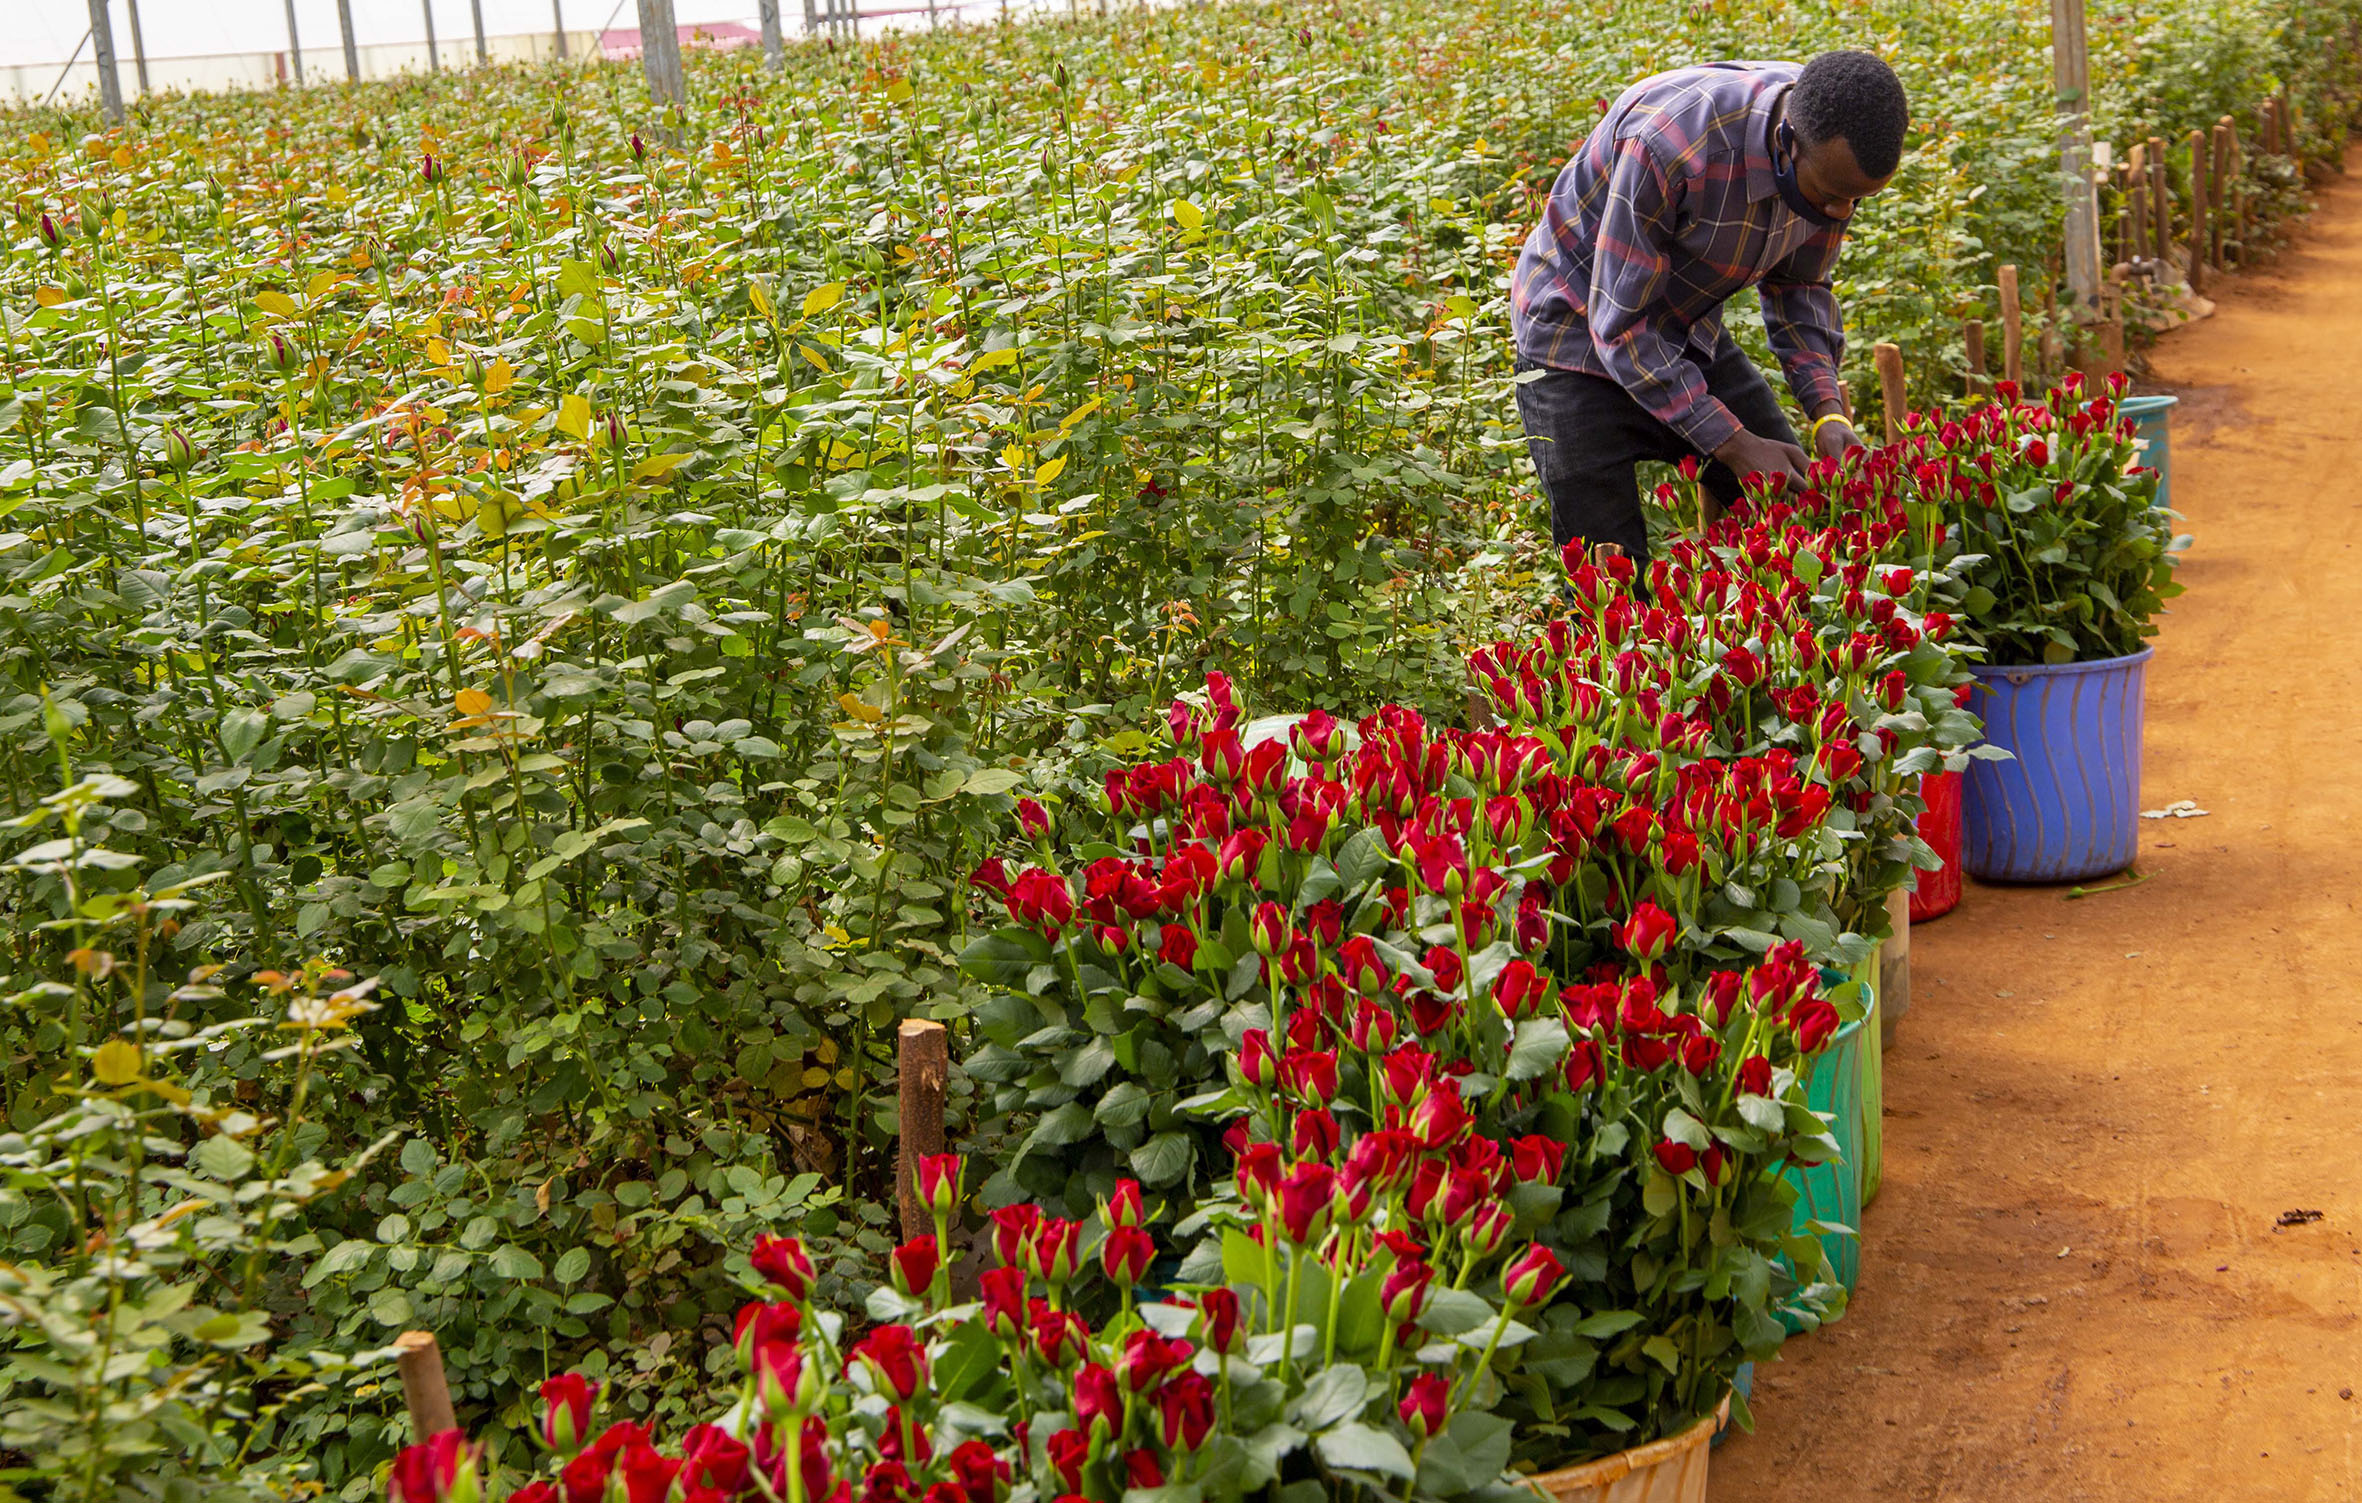 A worker sorts fresh flowers at Bella Flowers farm in Rwamagana on June 19, 2020. Traders who export flowers are among business operators who call for incentives as Netherlands and Rwanda move to boost trade to support the country to realise its ambition of becoming self-reliant. Rwandau2019s trade with the Netherlands stands at US$ 41million as of 2021. Of these, 73 % are imported from the Netherlands while exports represent 27 %. Photo: Courtesy.